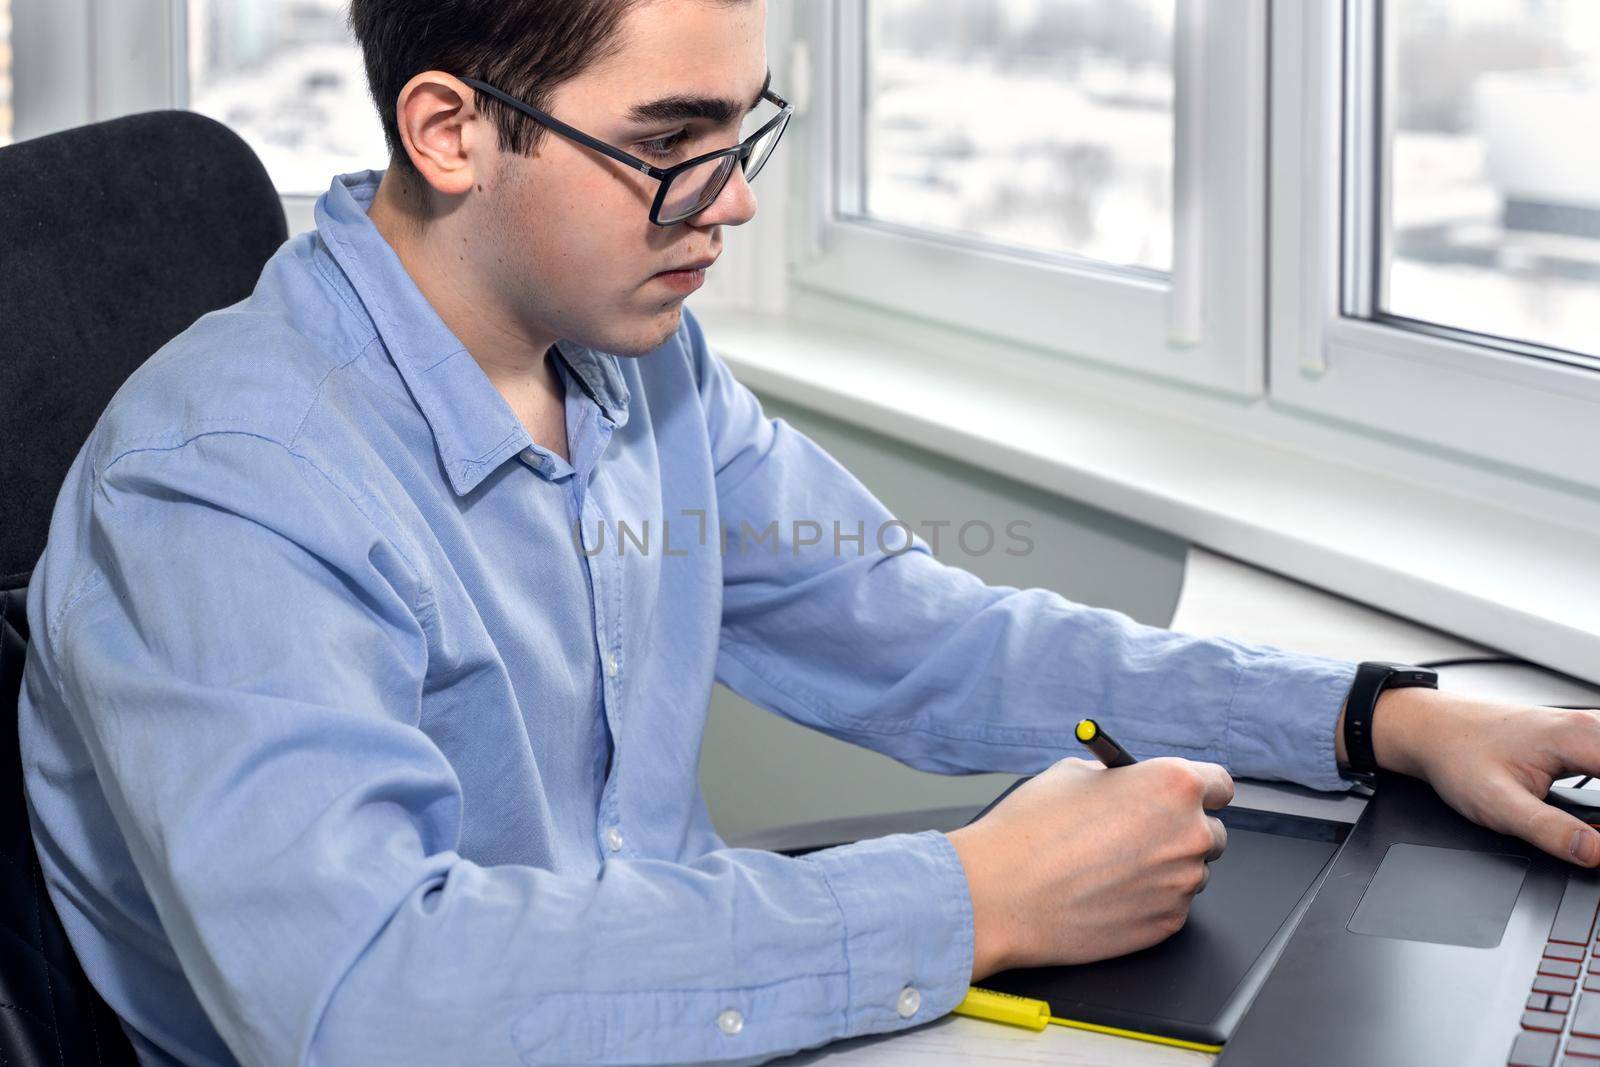 serious young man in glasses as he works on his laptop using a graphics tablet